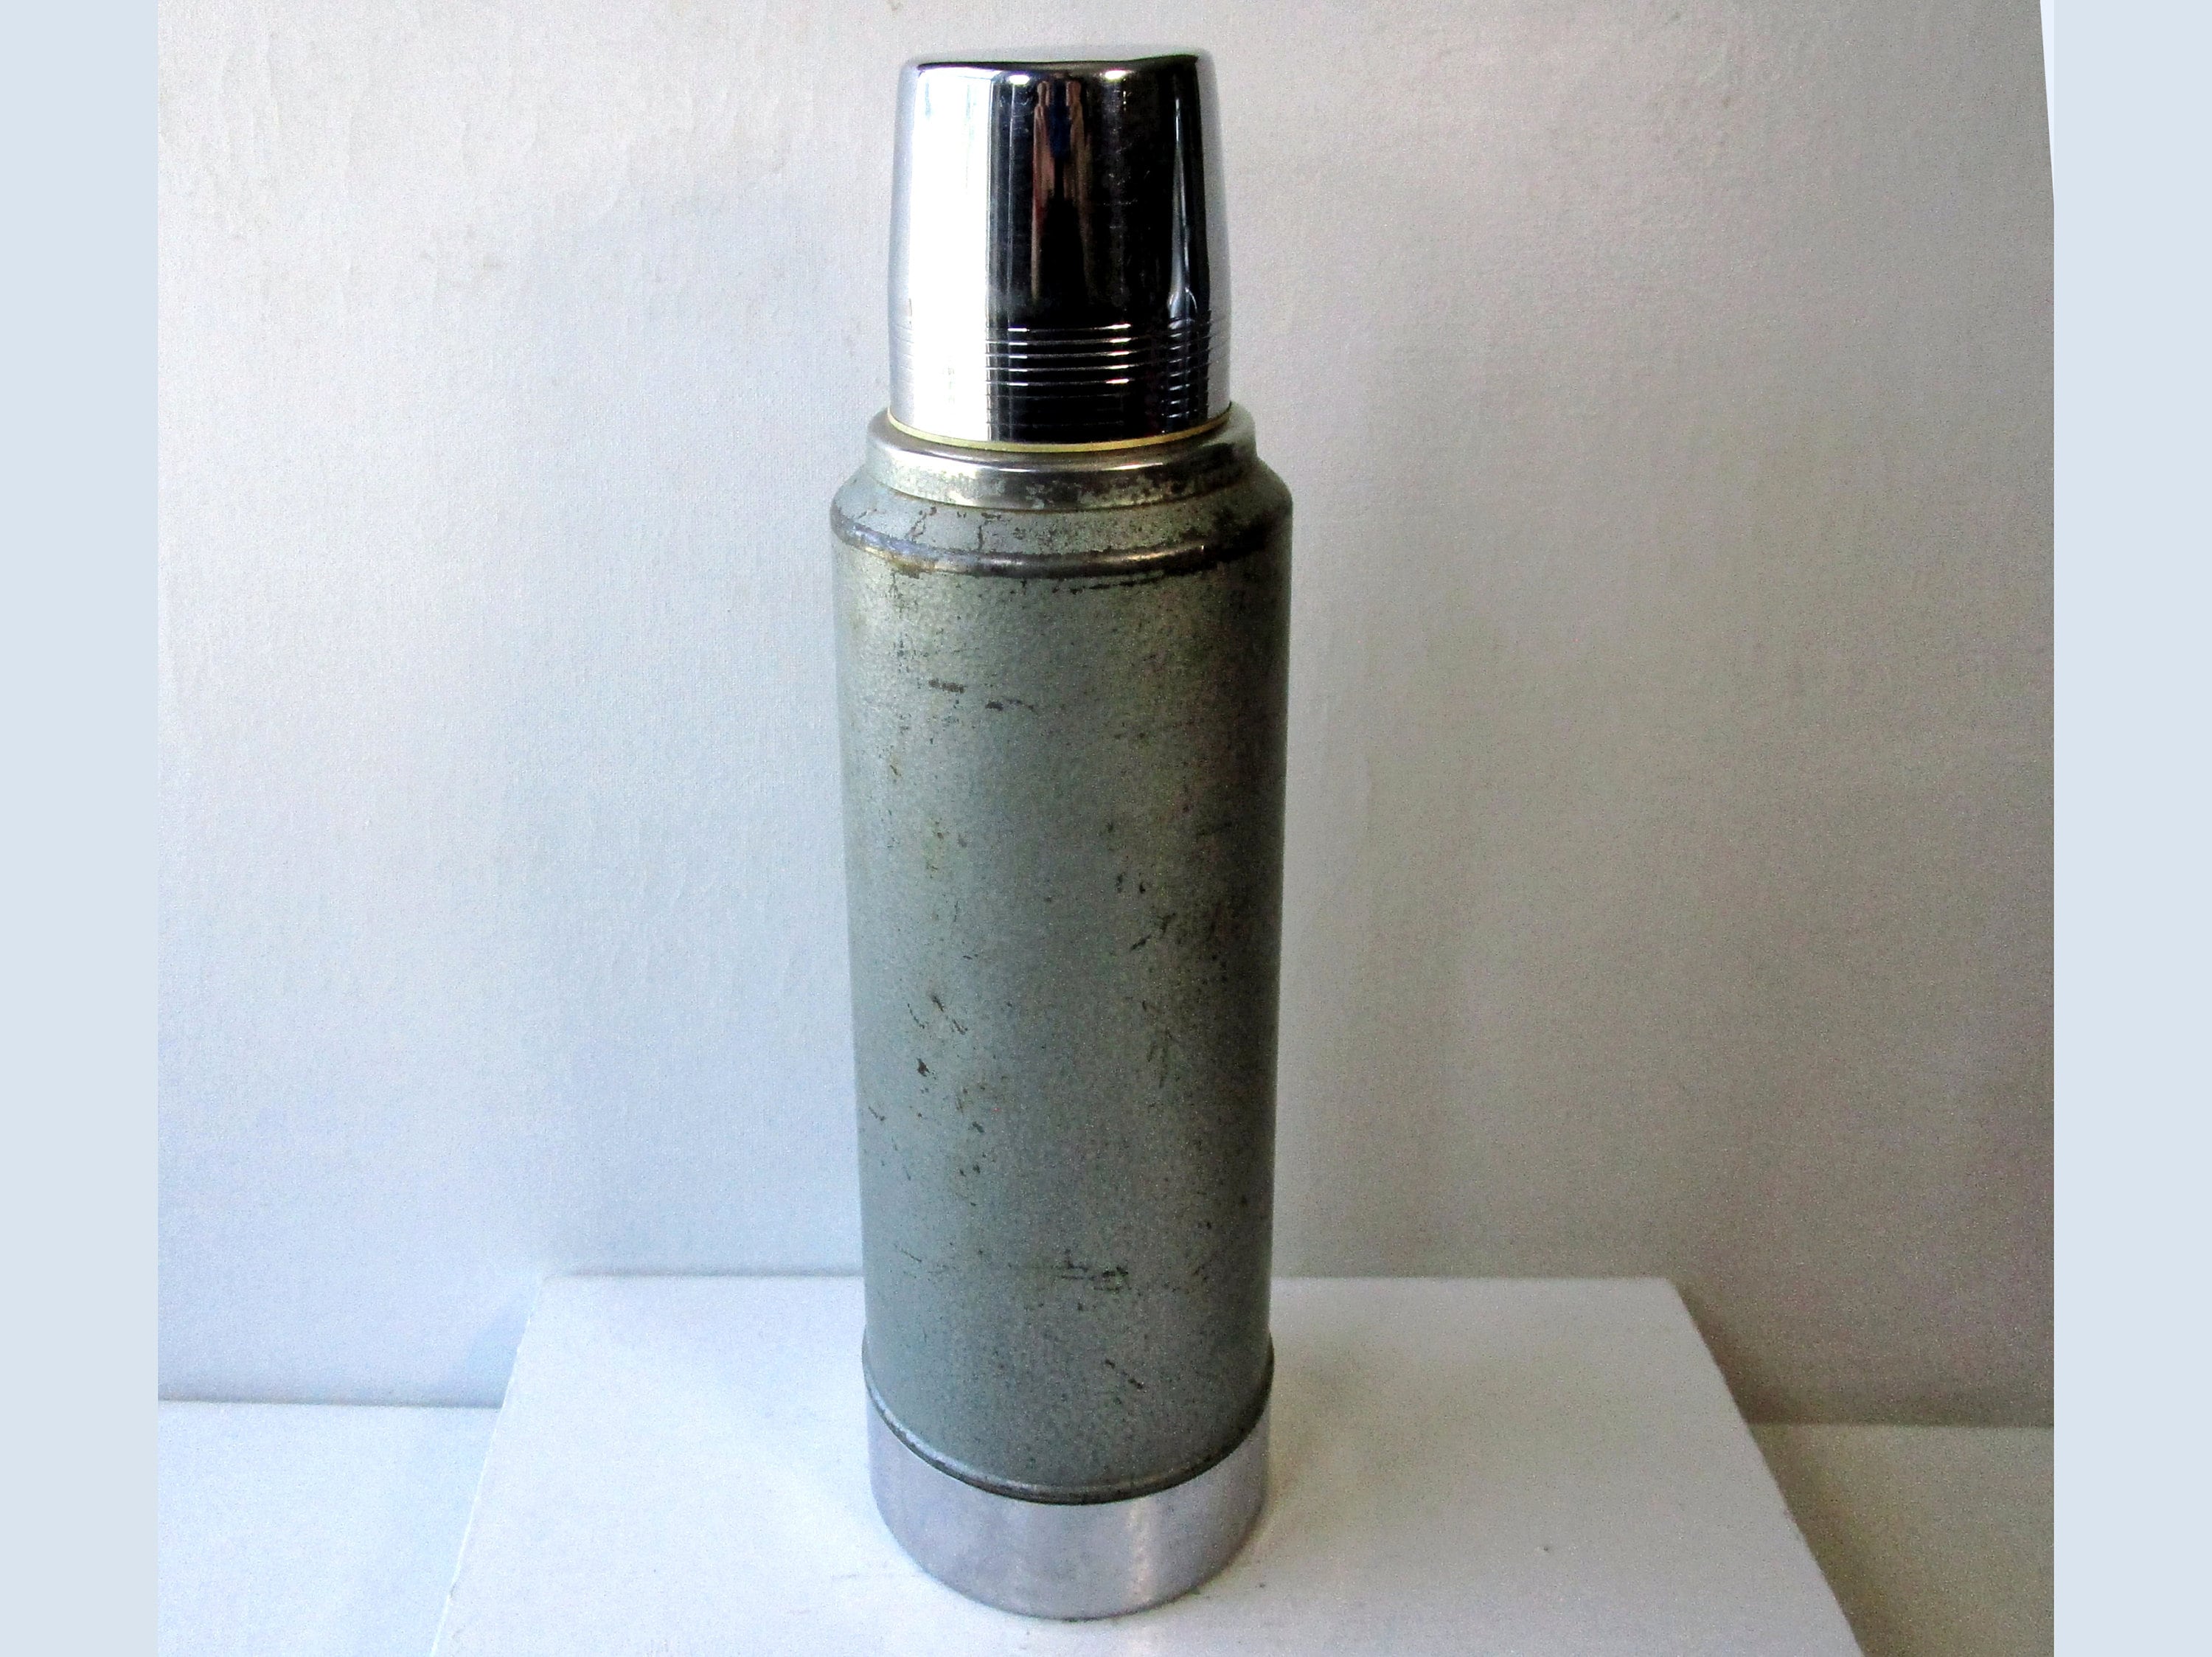 Vintage Stanley Aladdin Thermos, Metal Thermos, One Quart, Made in